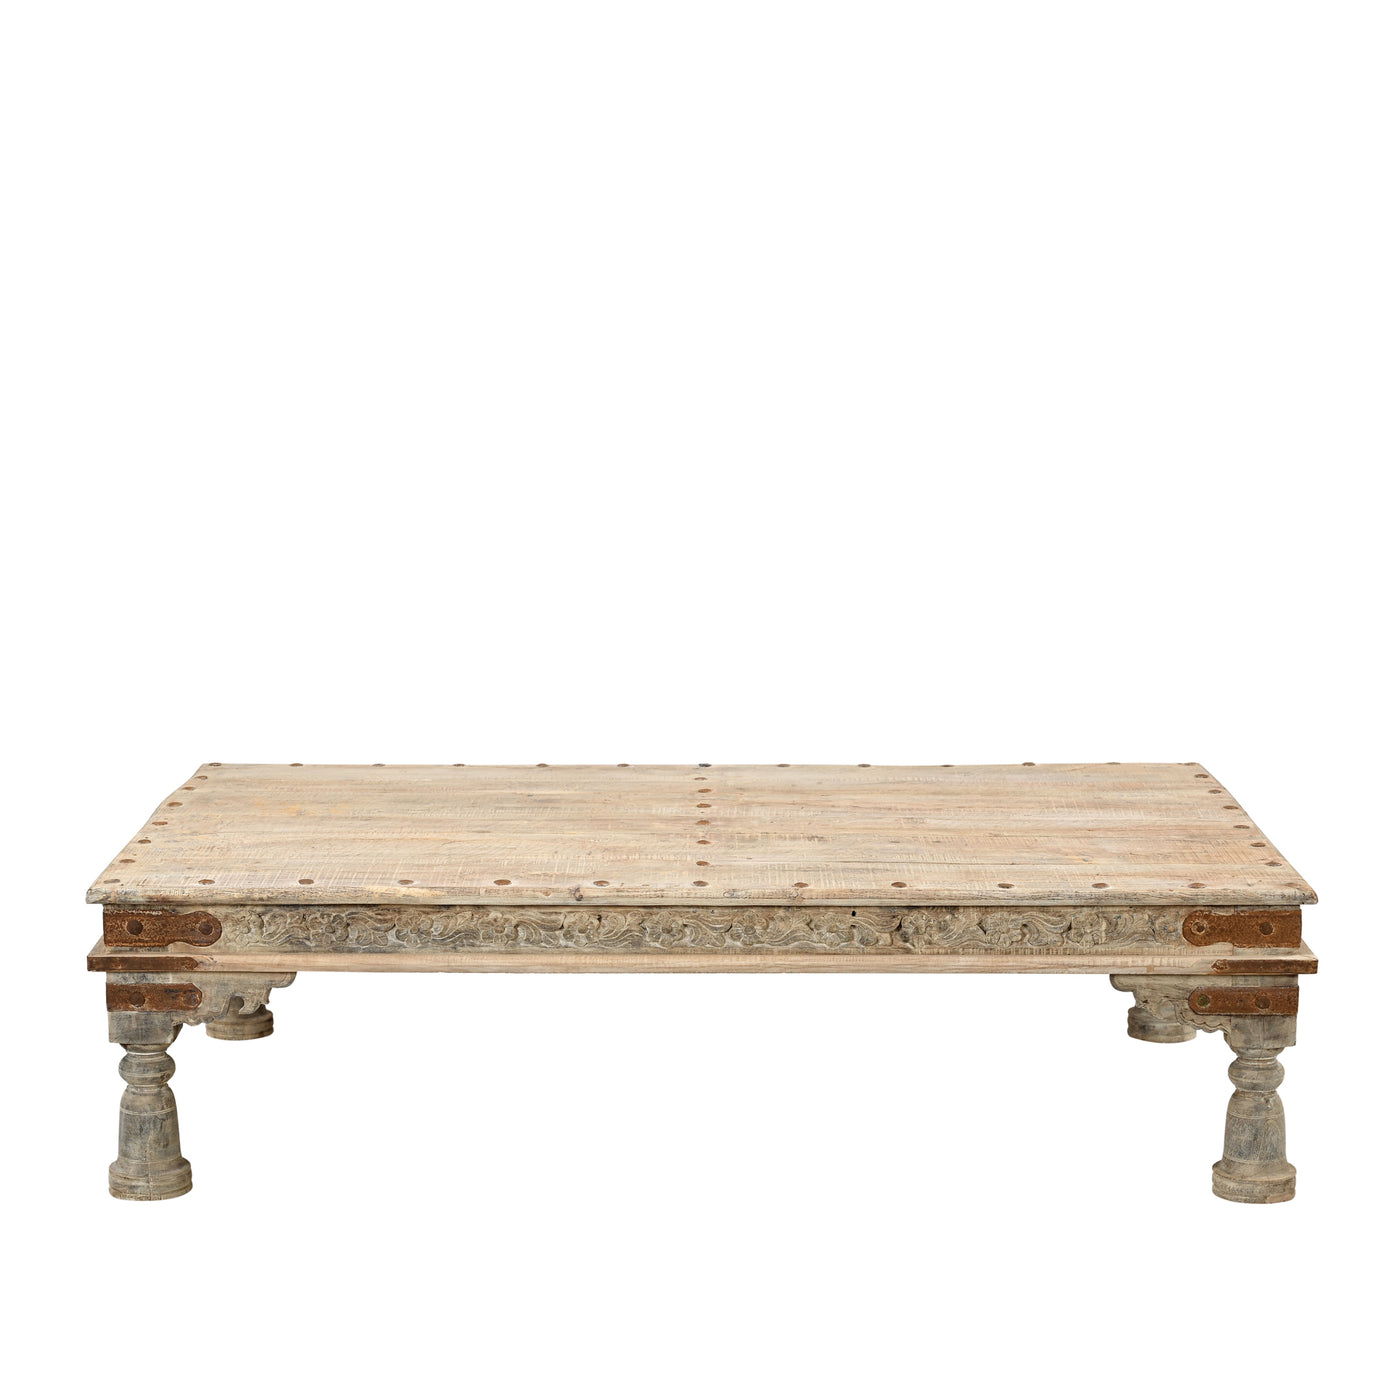 BAJOT - Old coffee table with n ° 9